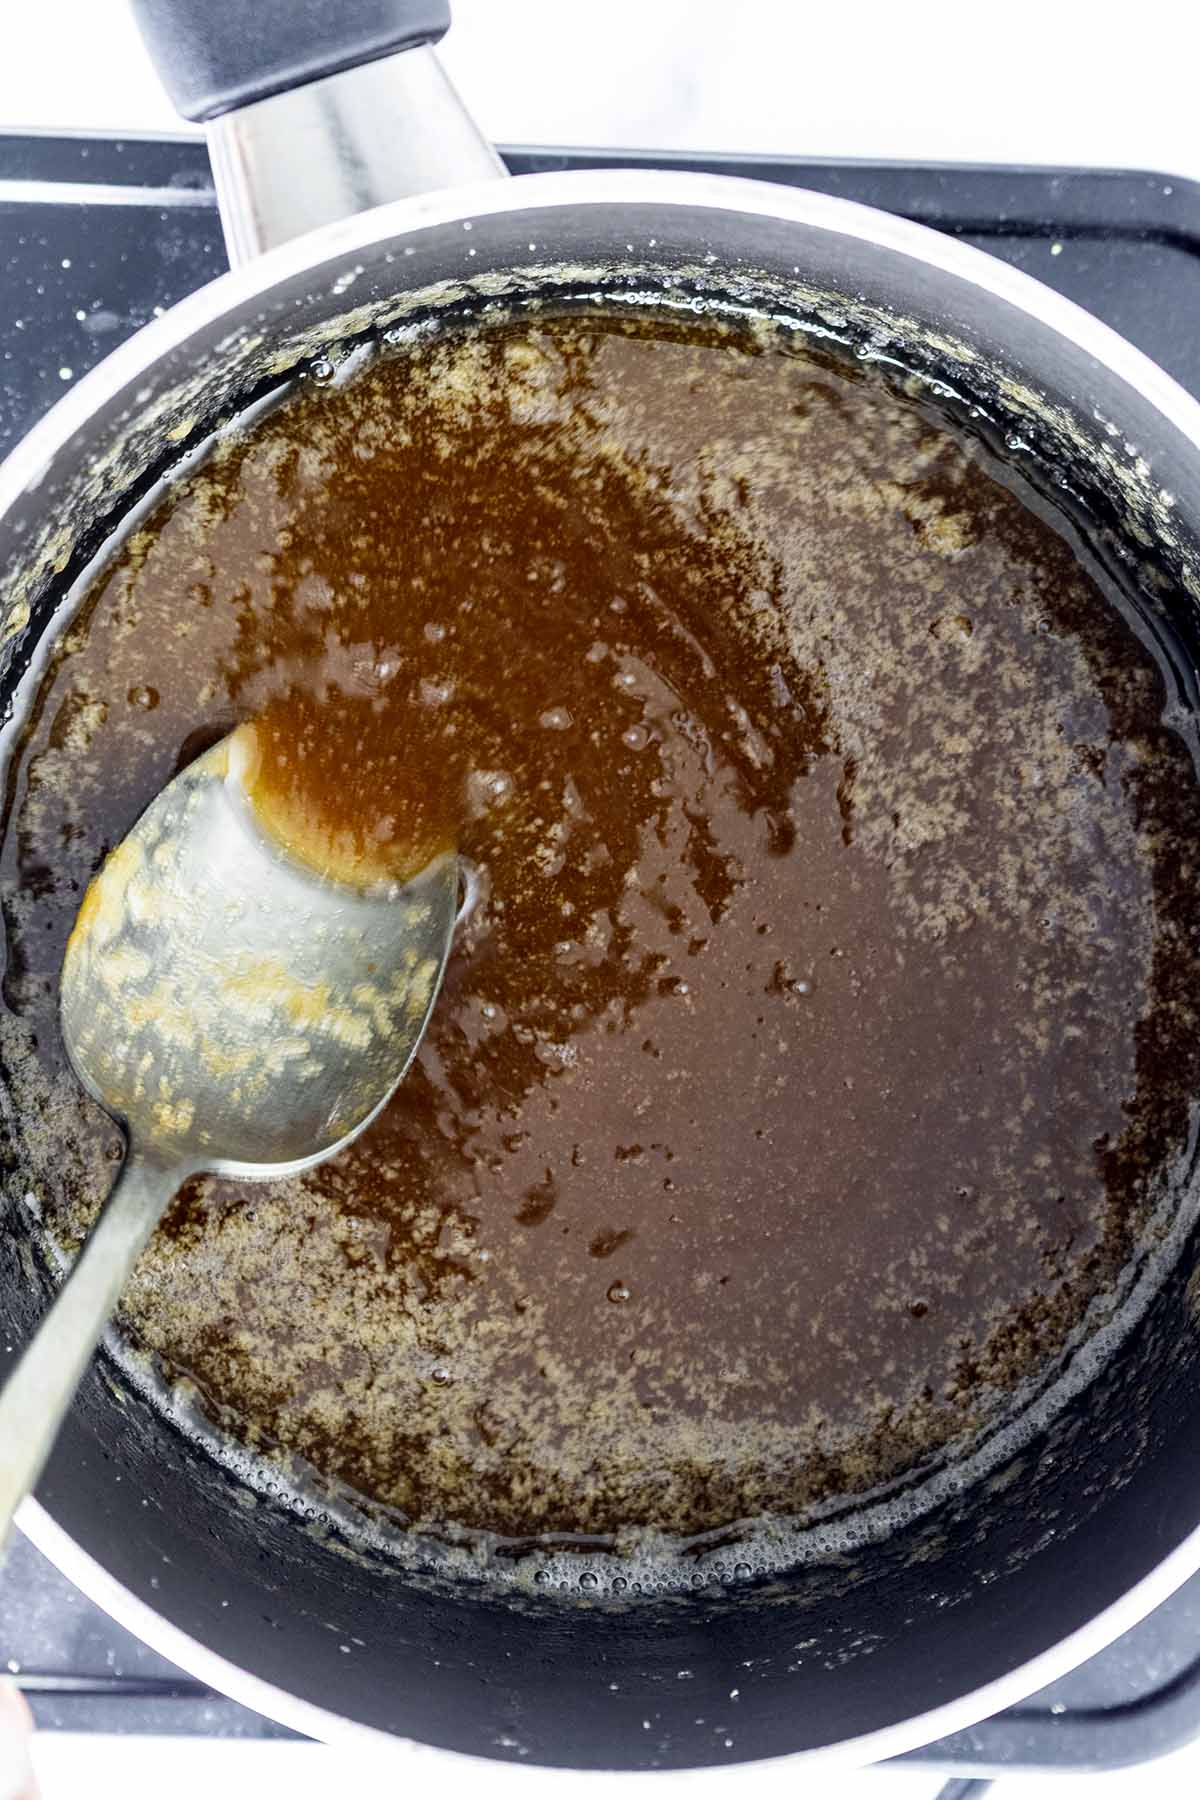 Caramel sauce cooking in a saucepan with a spoon